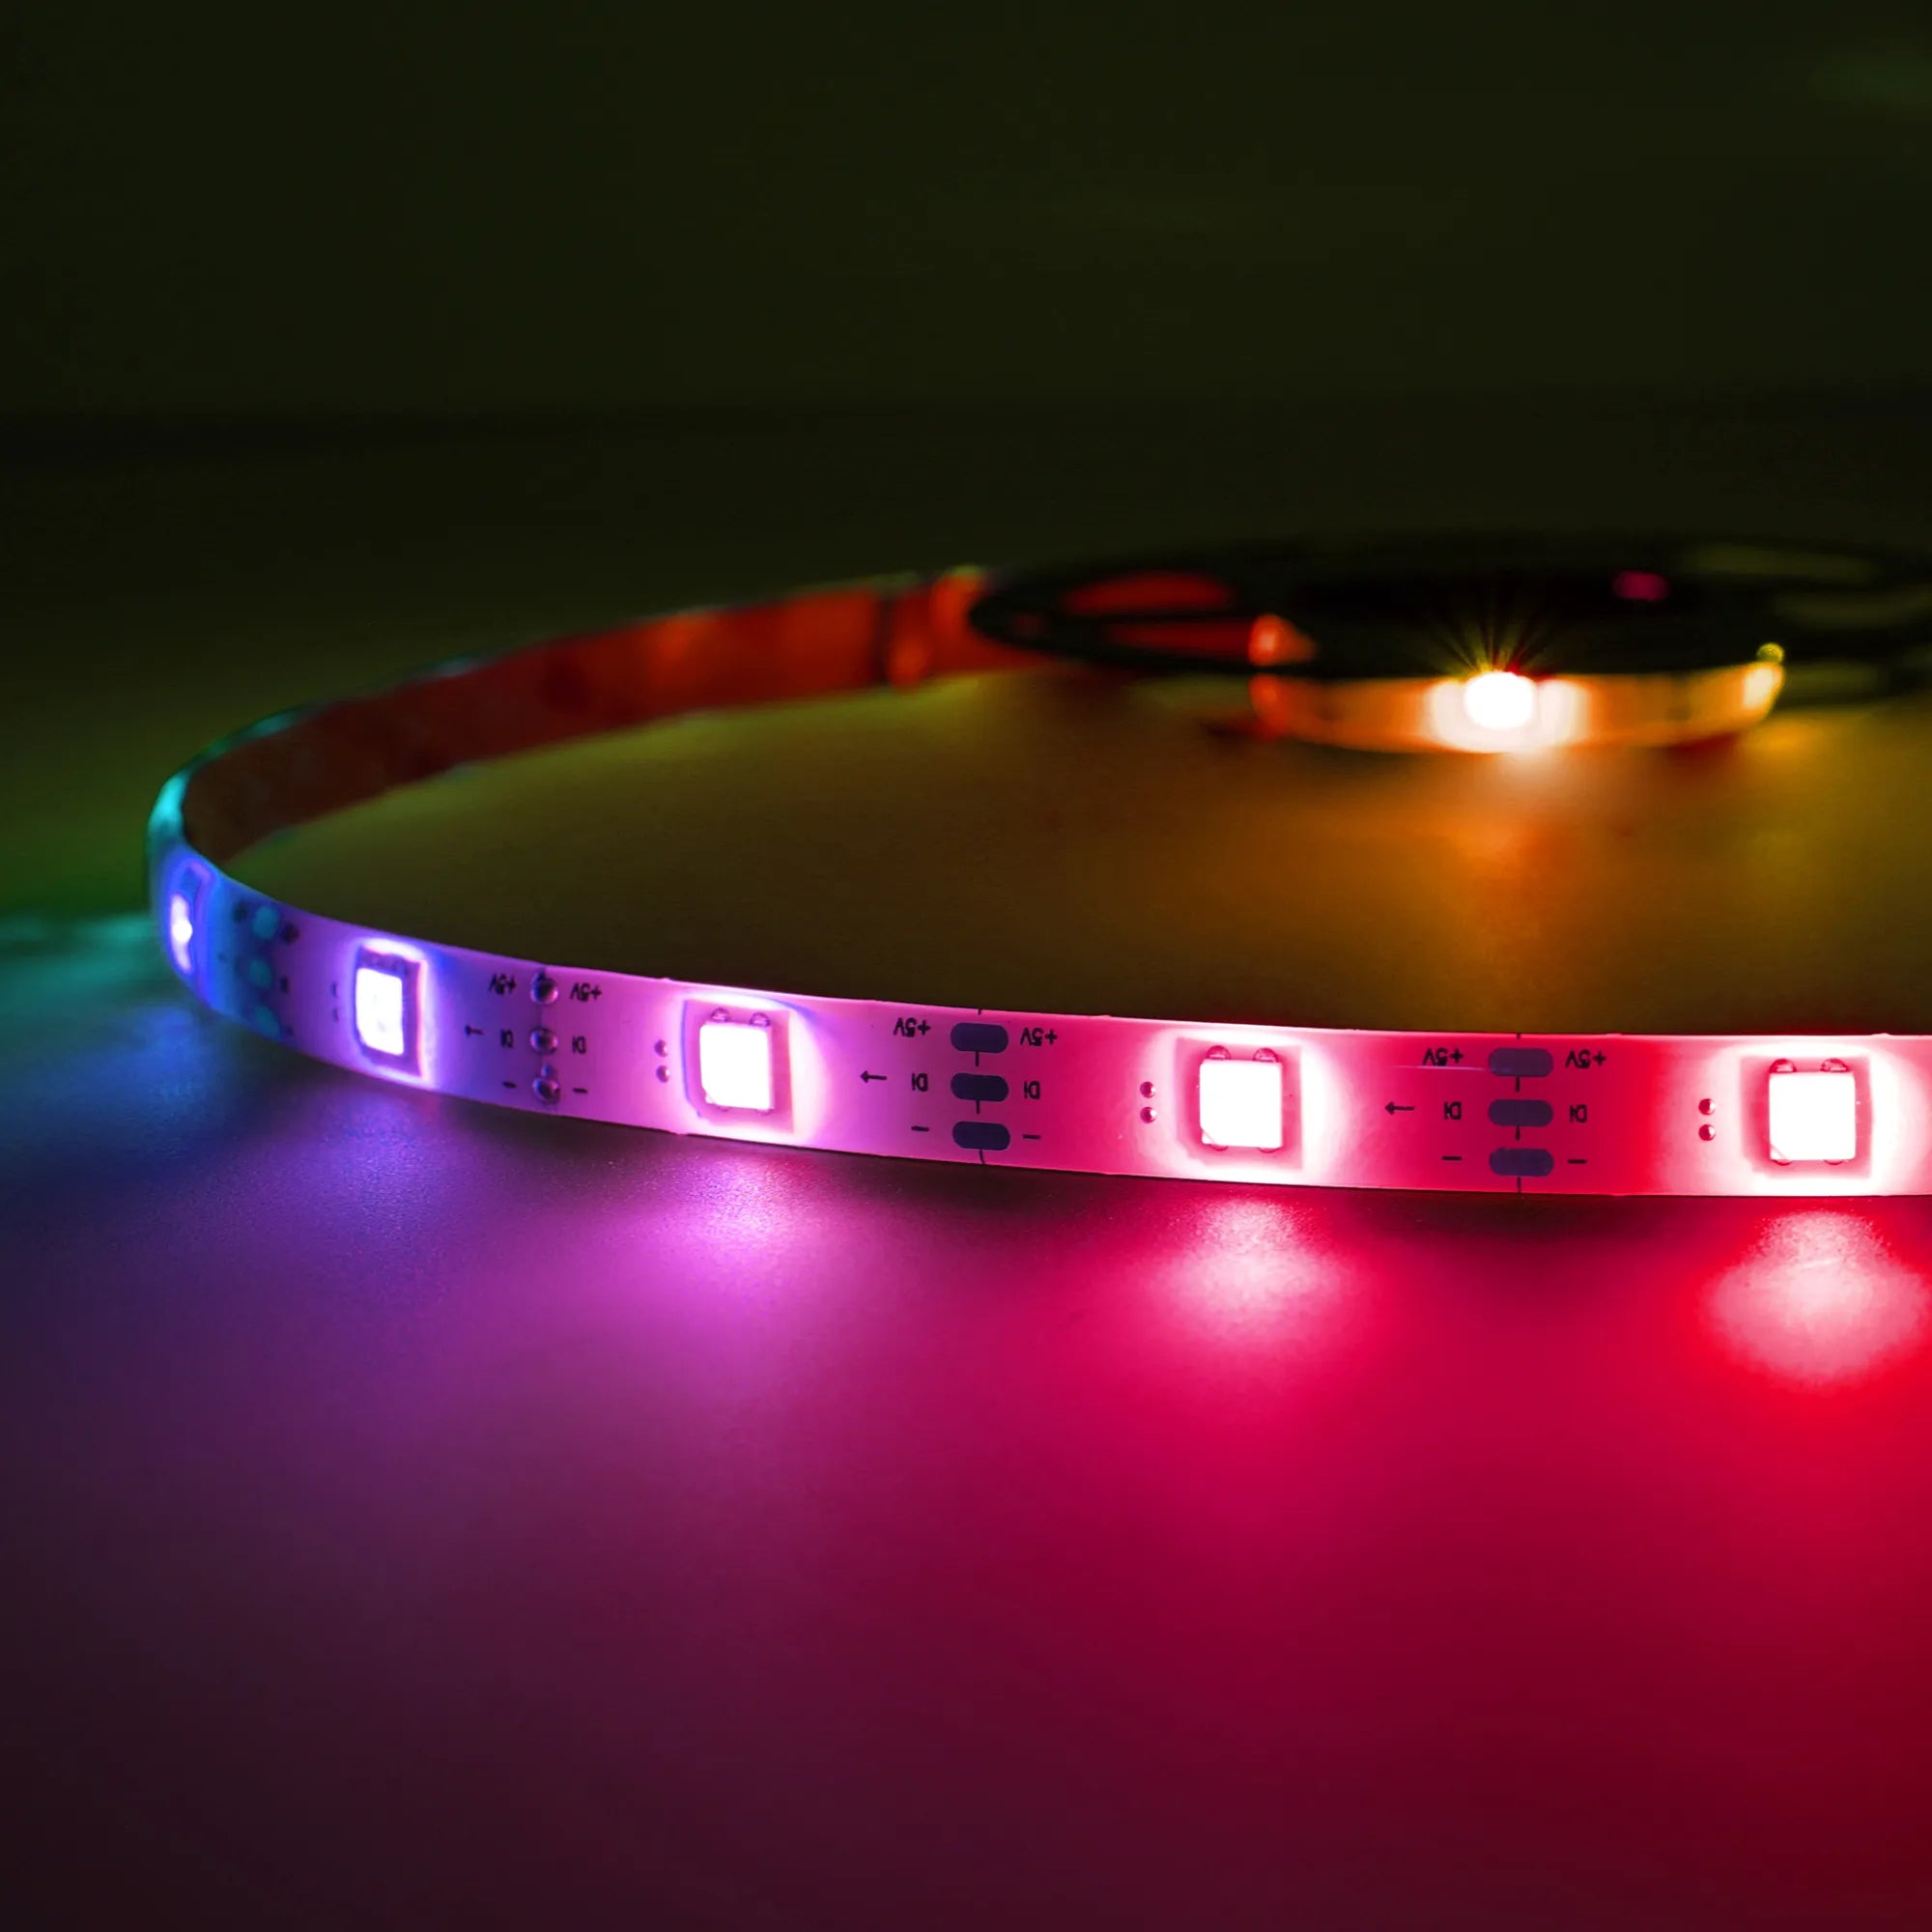 MONSTER LED FLOW Multi Color RGB + IC LED light strip with remote